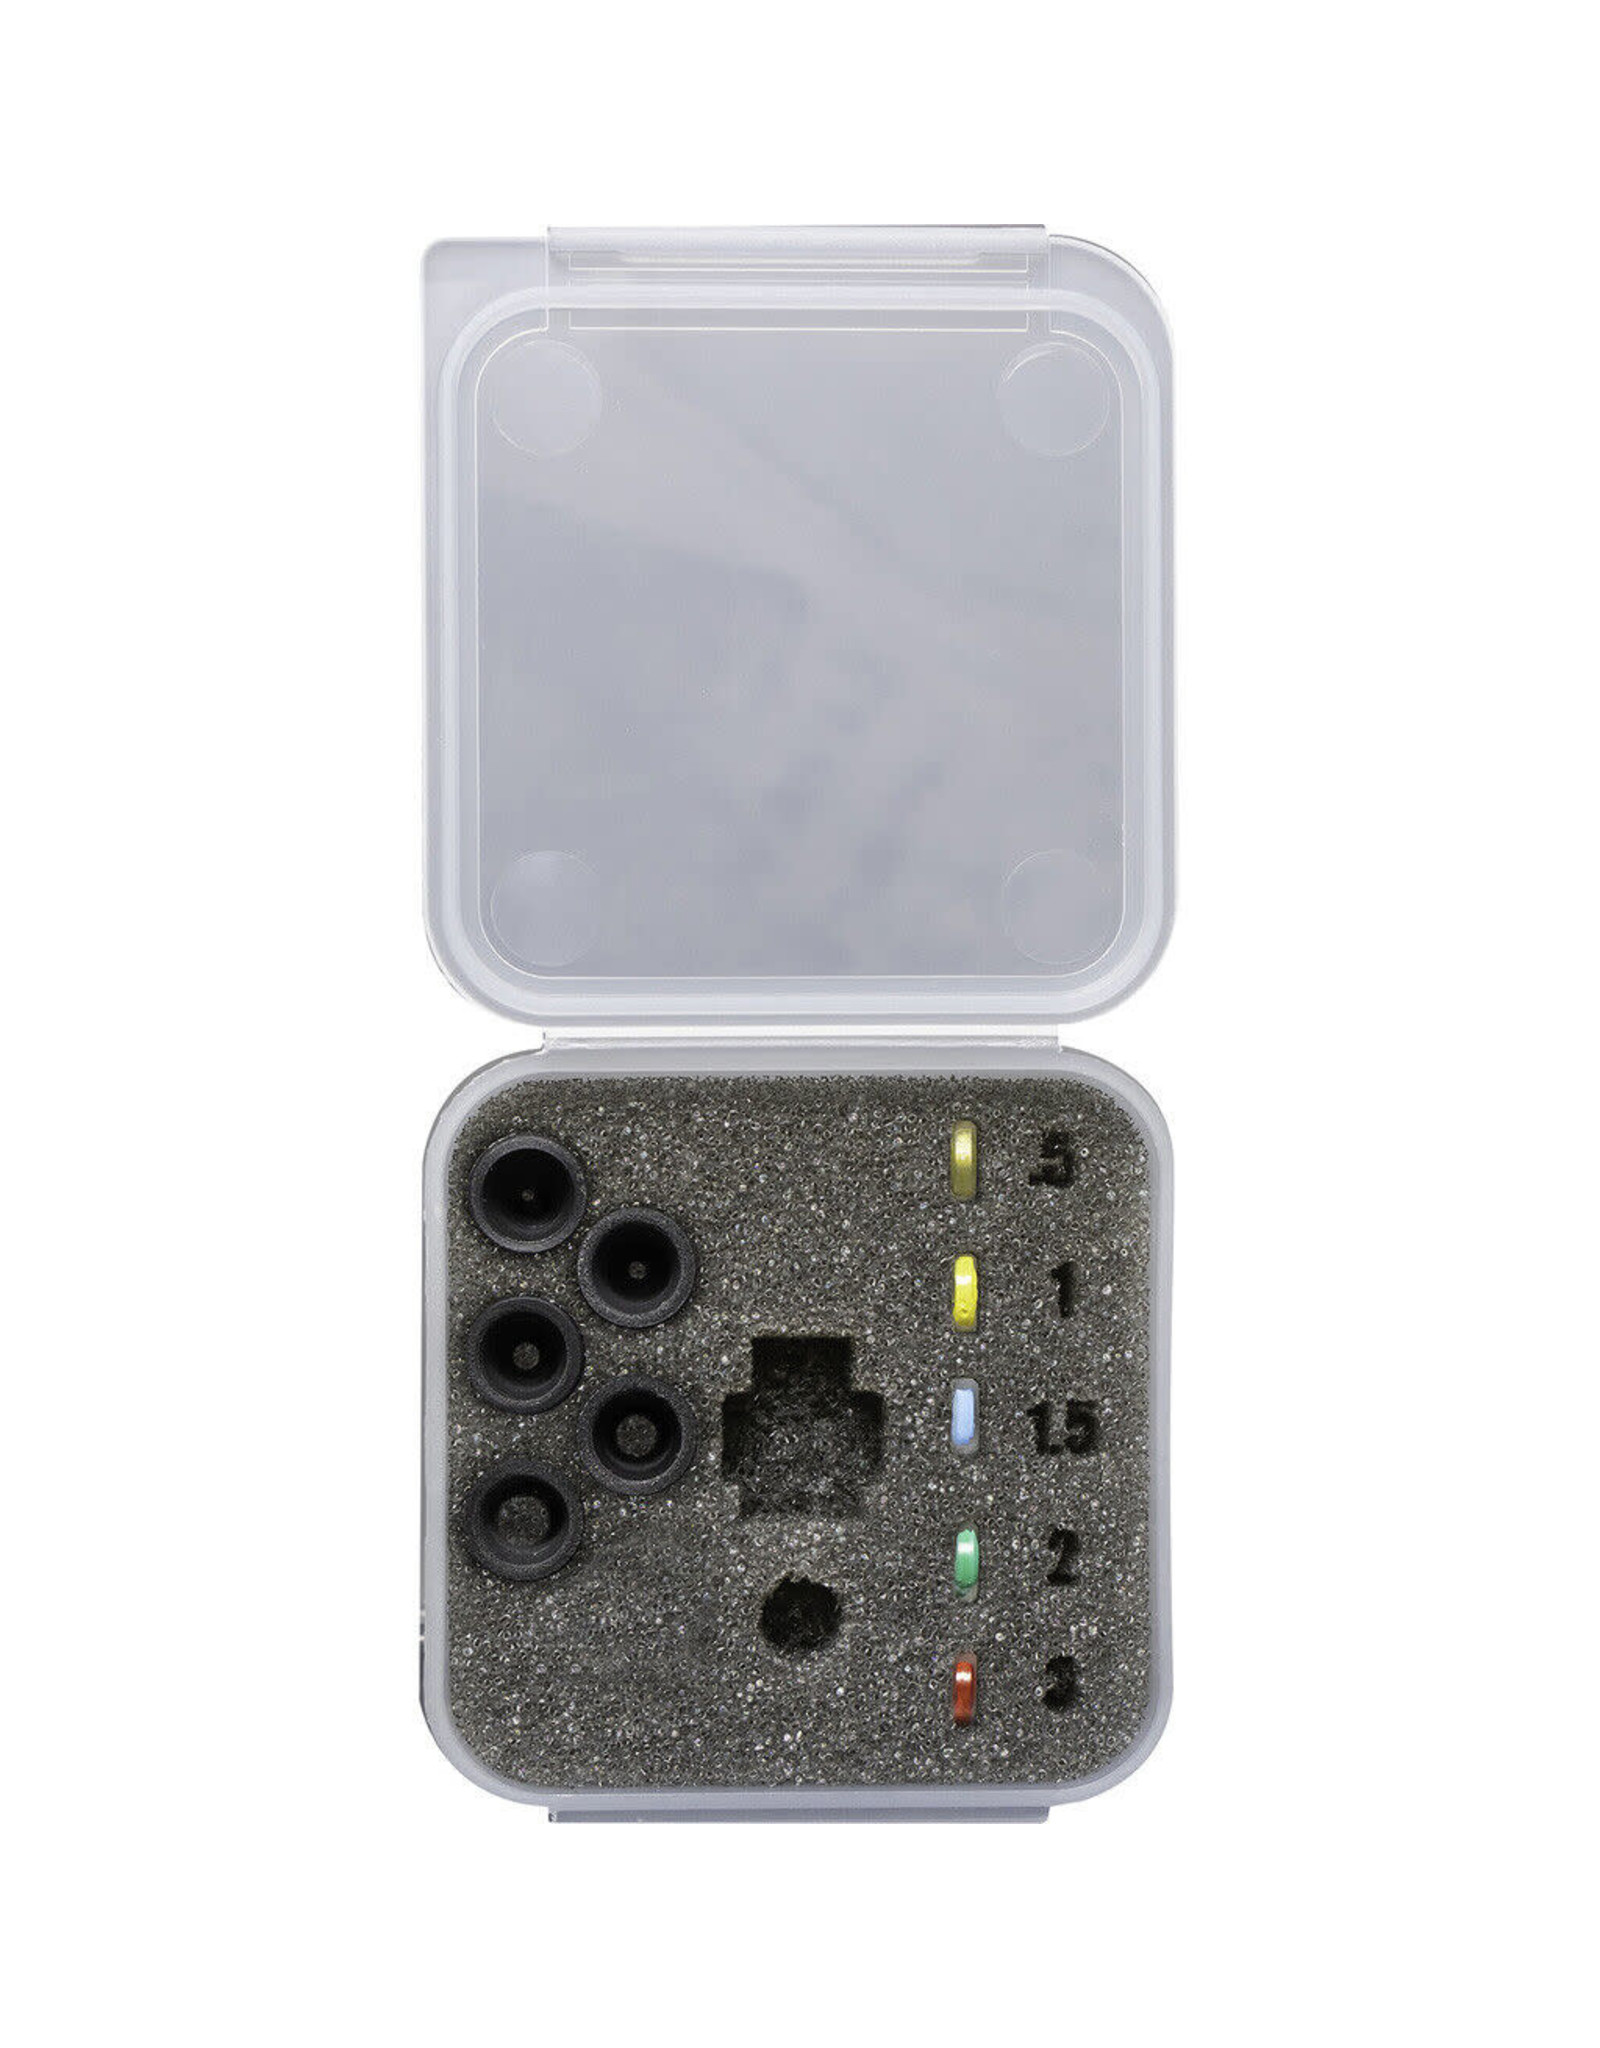 SPECIALTY ARCHERY LLC Specialty Archery PXS Target Peep Deluxe Kit Contains All Apertures / Clarifiers